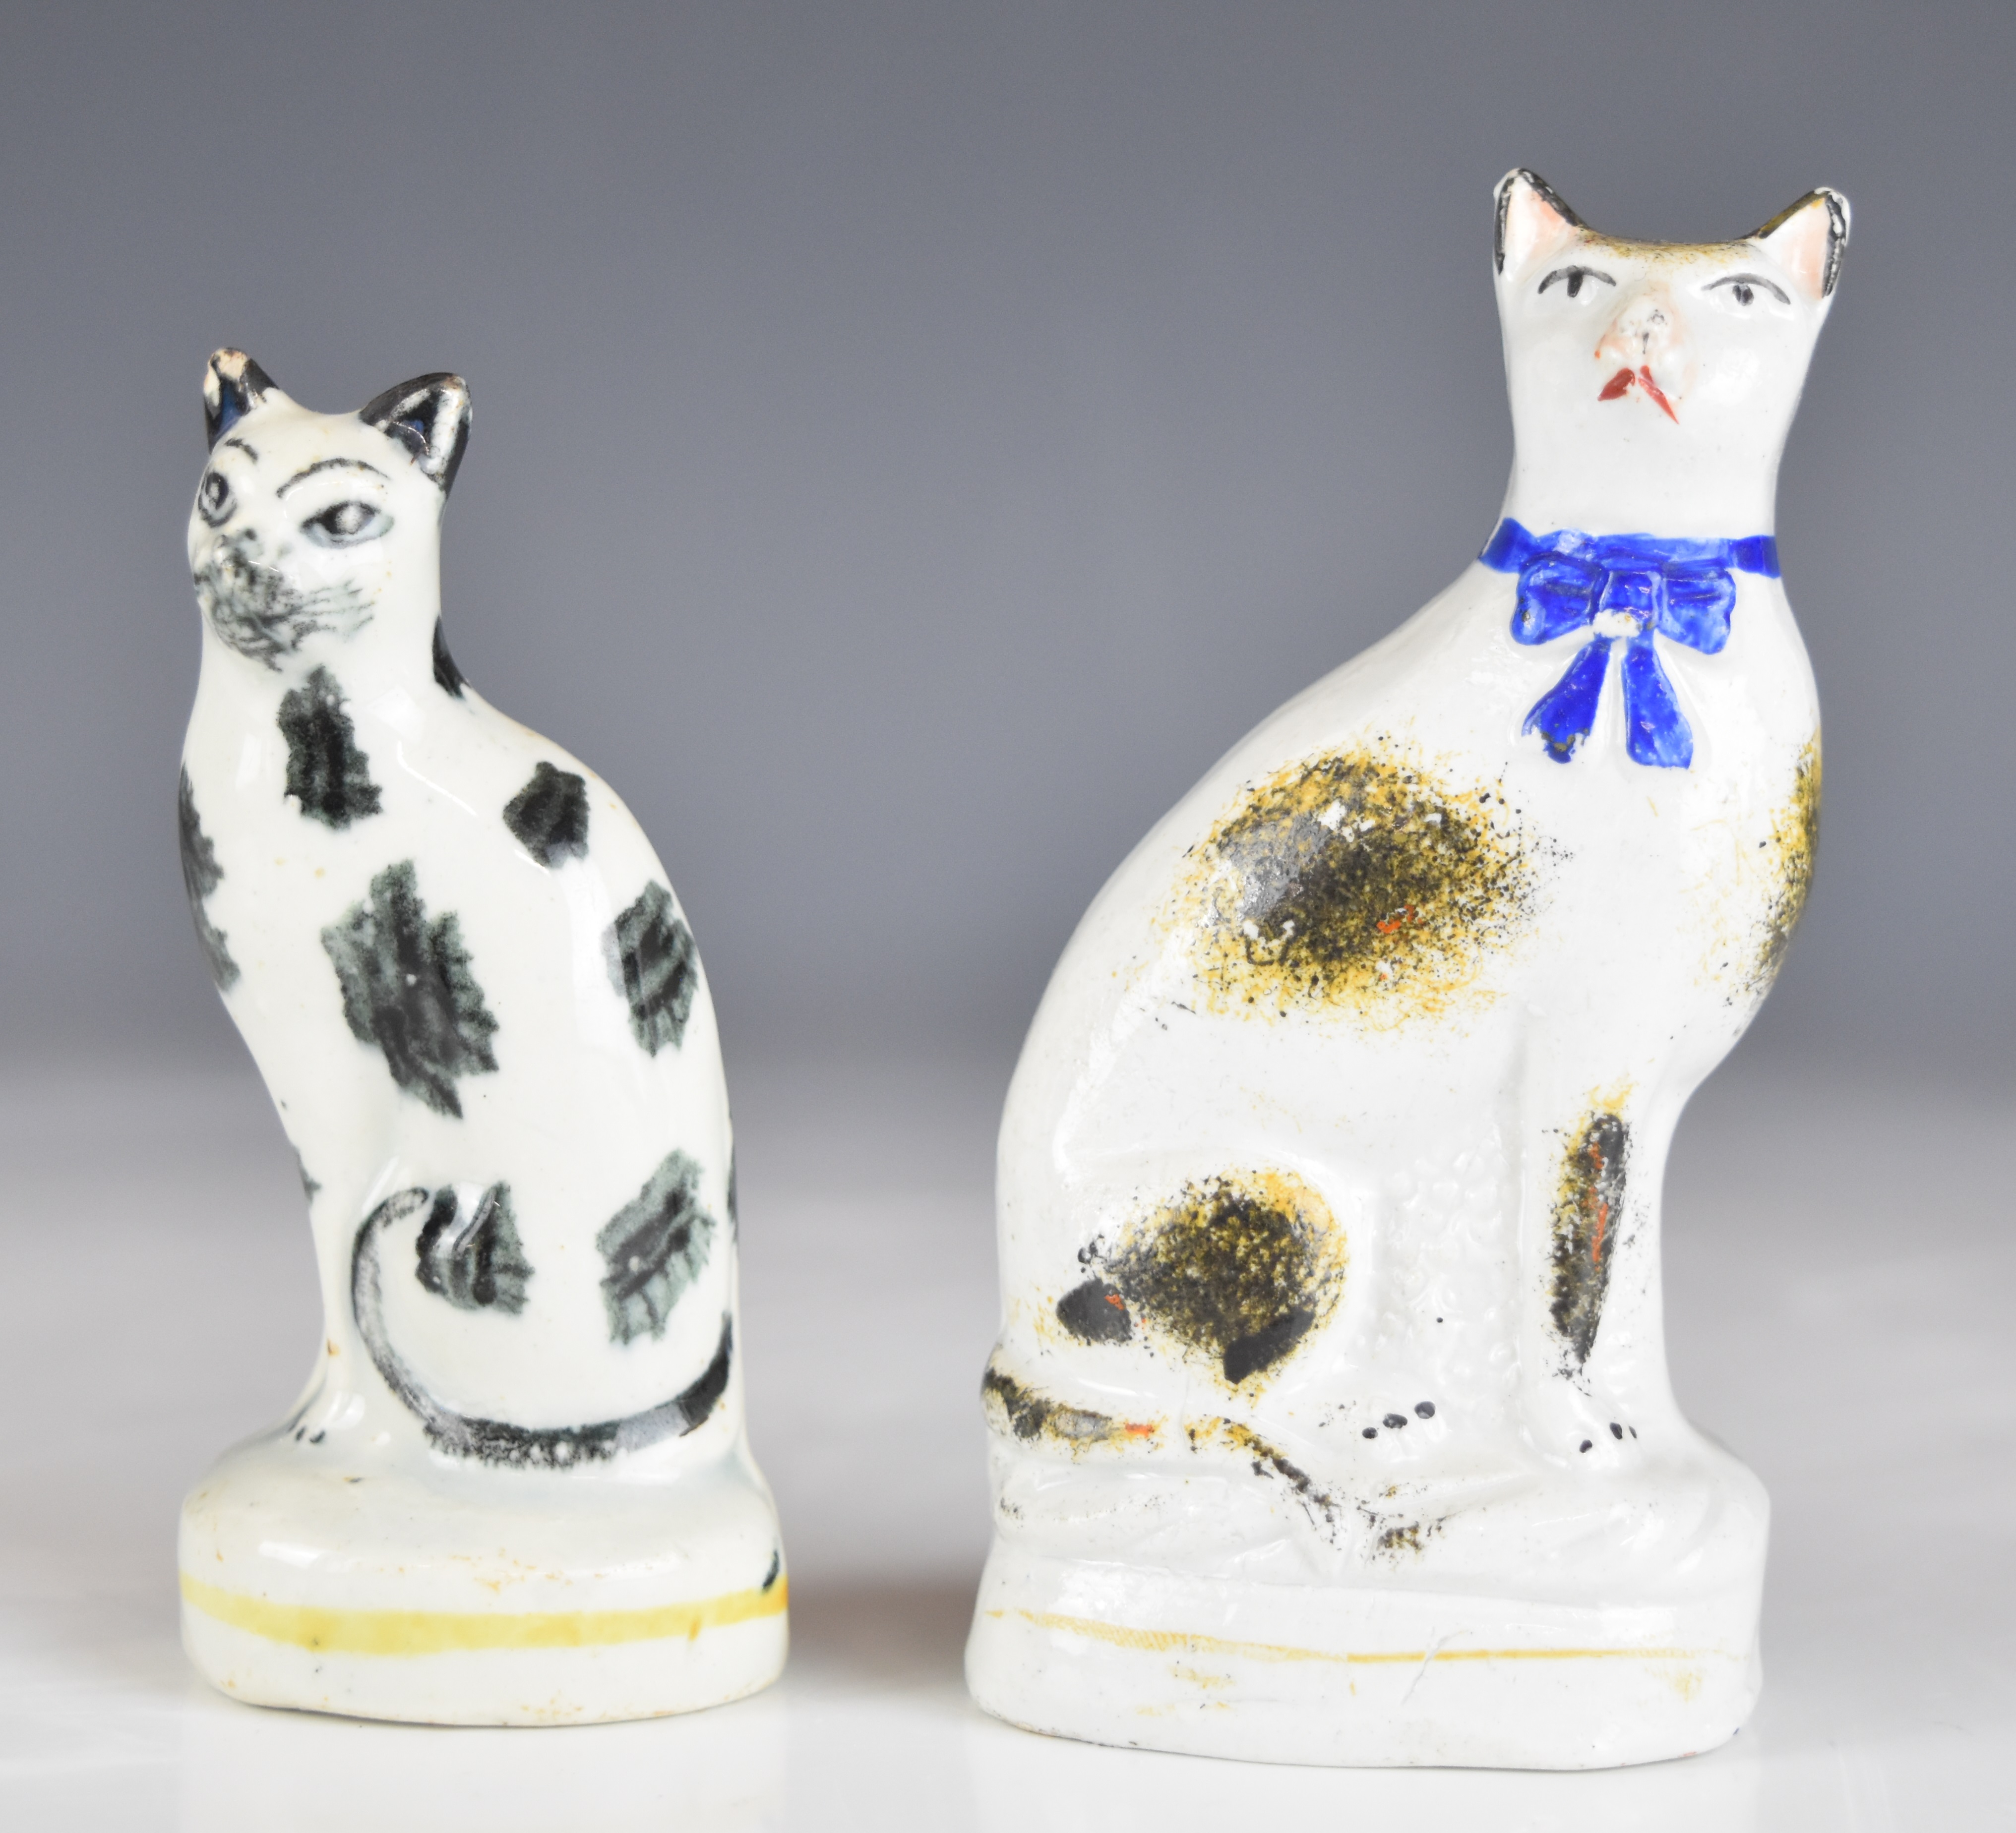 19thC miniature Staffordshire and salt glazed stoneware cat and dog figures including a cat with - Image 8 of 8